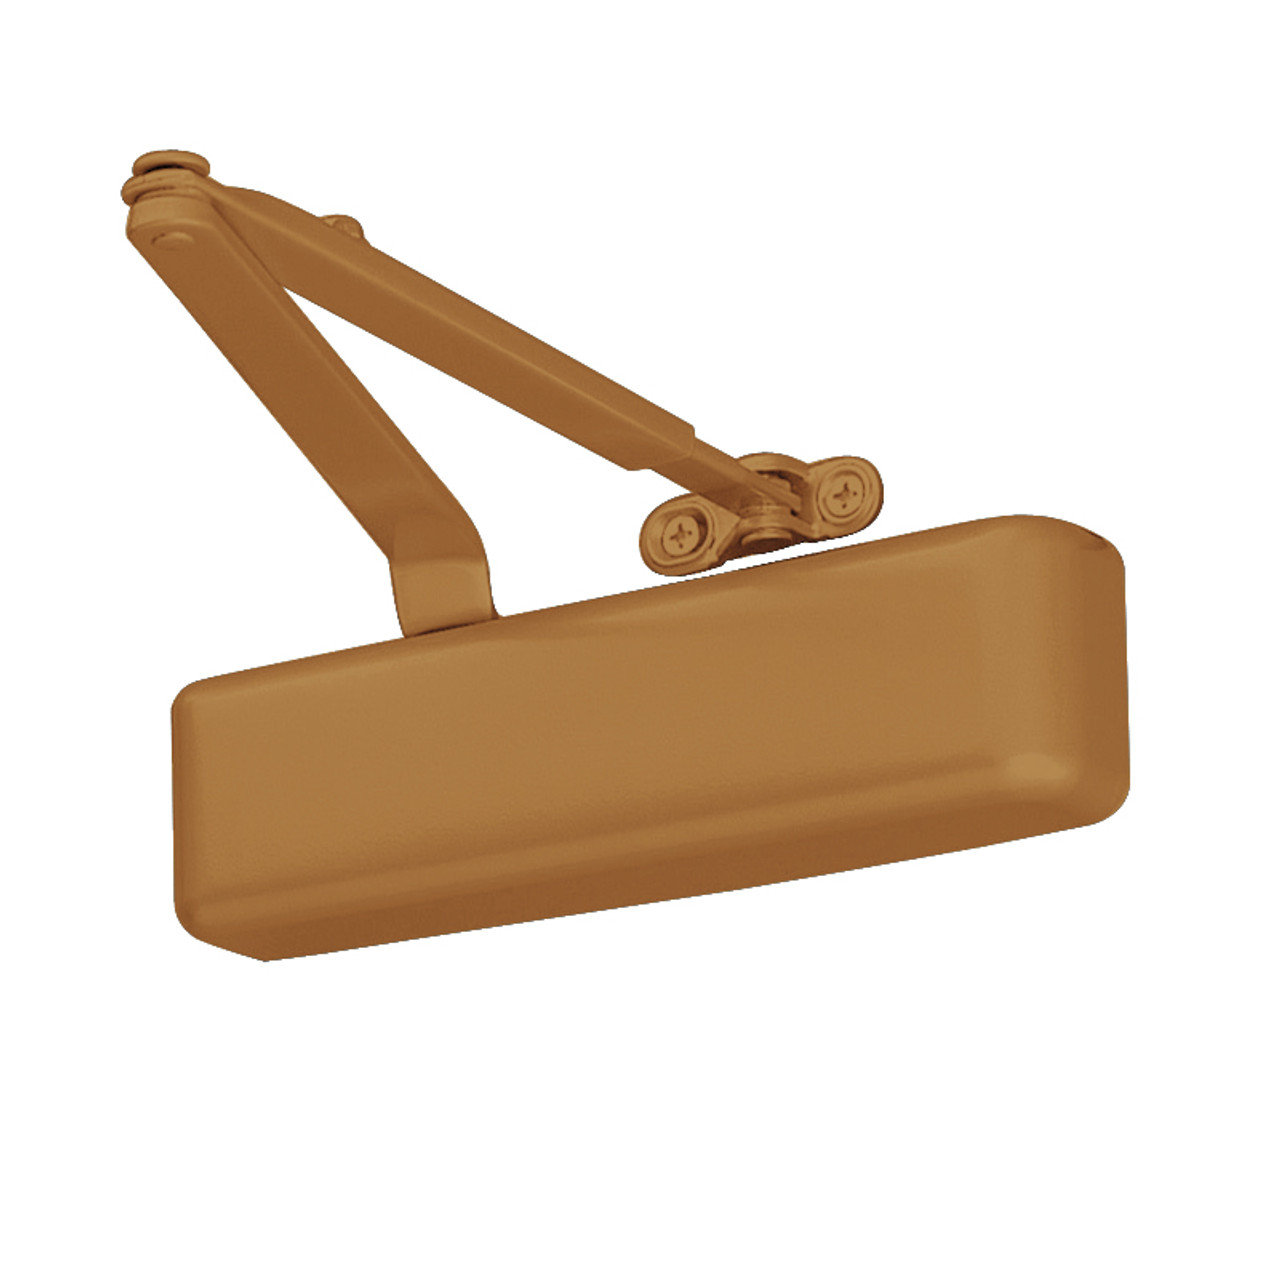 4031-Hw-PA-LTBRZ LCN Door Closer Hold Open Arm with Parallel Arm Shoe in Light Bronze Finish